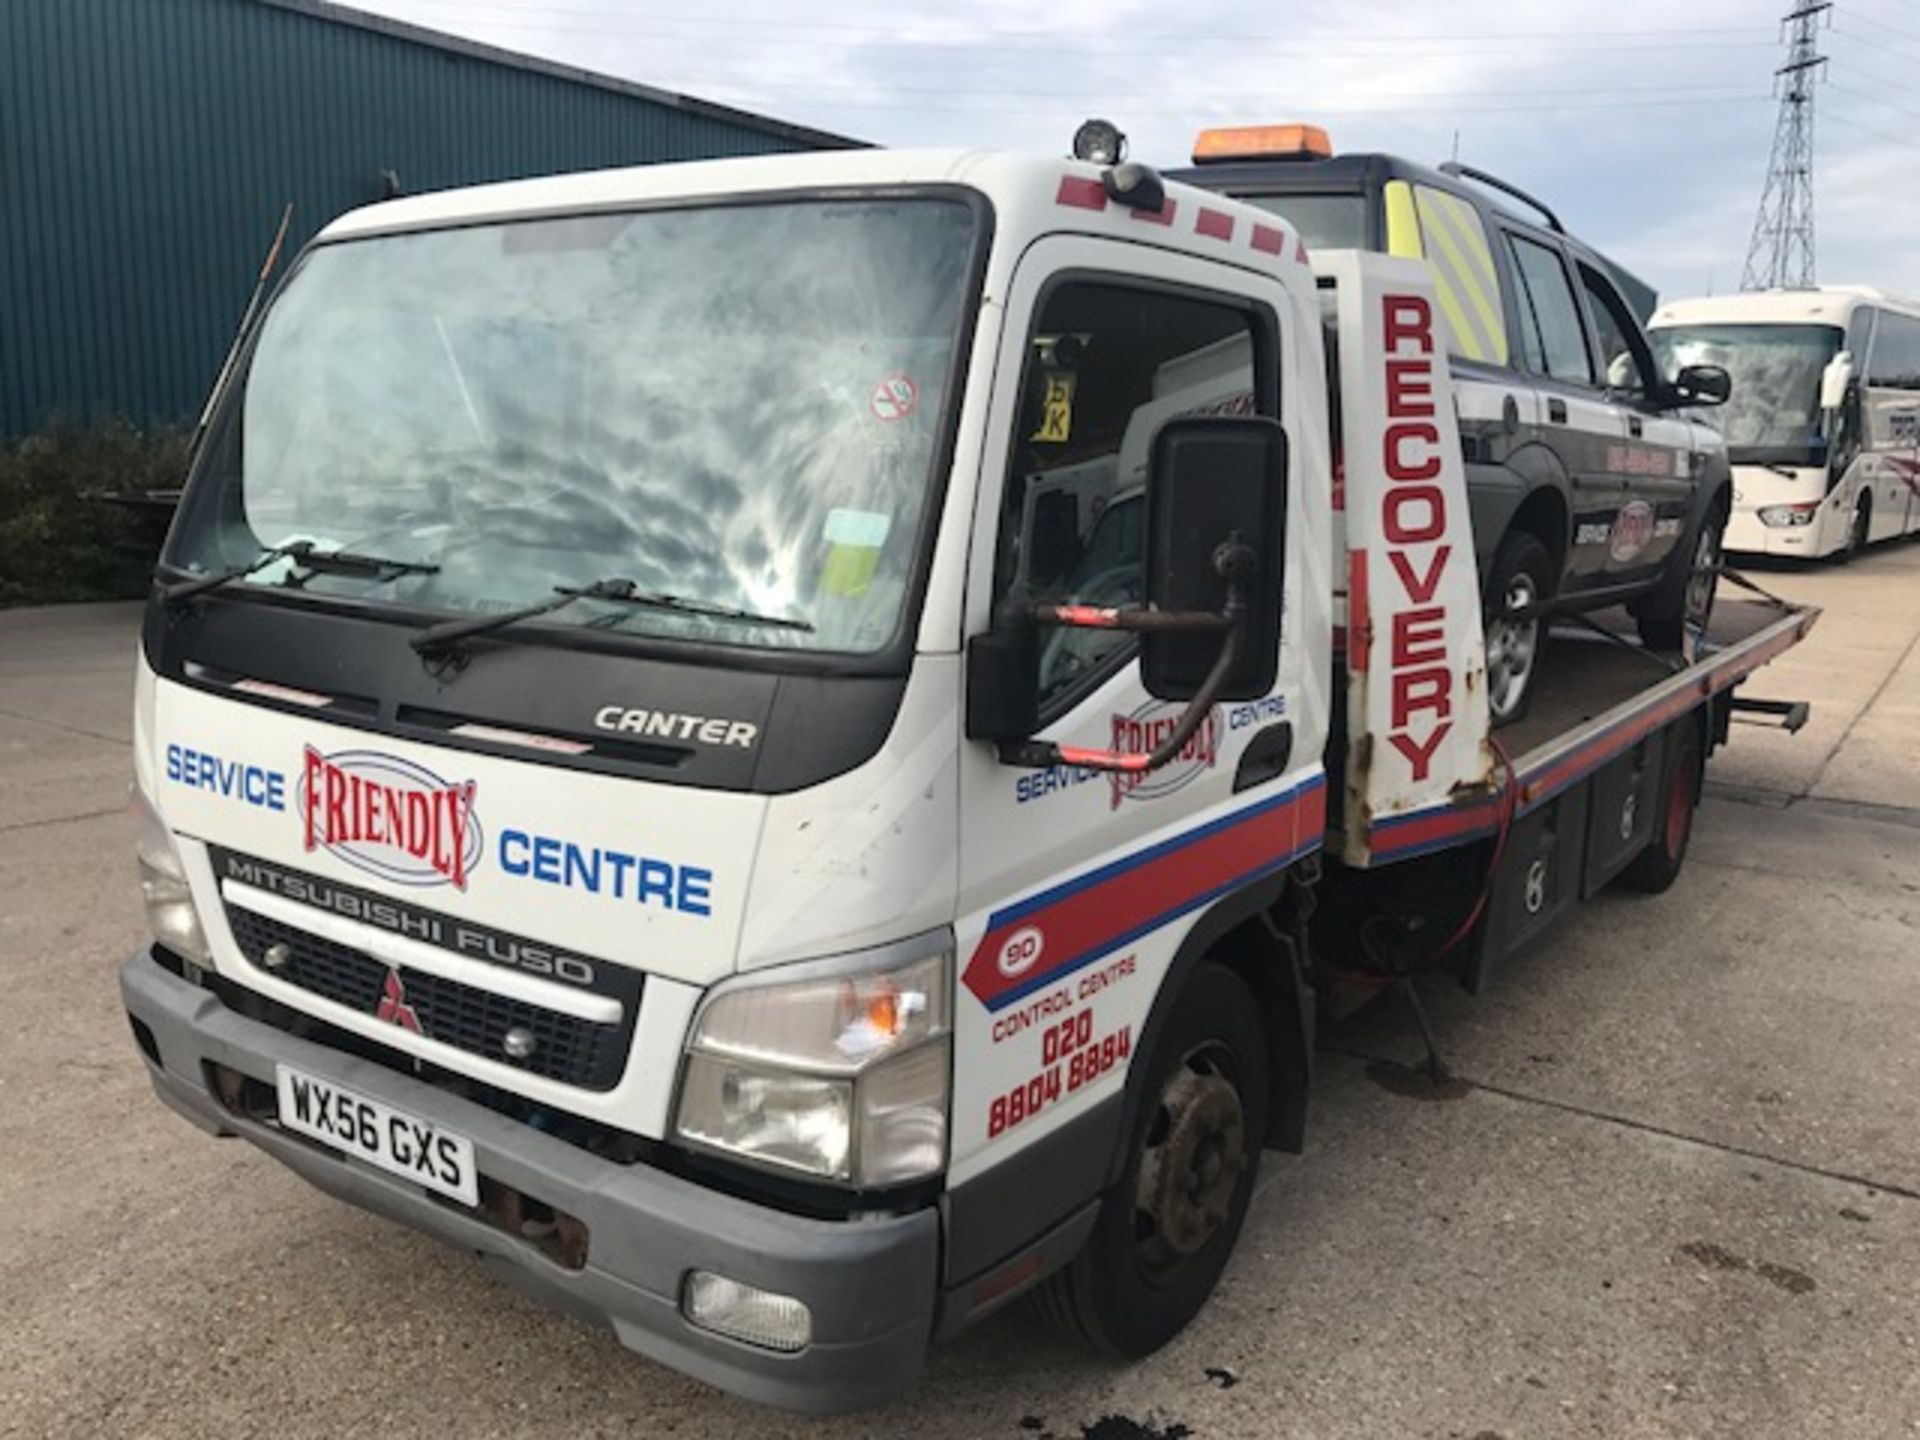 2006 Mitsubishi Fuso 7.5T tilt and slide breakdown recovery vehicle complete with Pro-Build - Image 3 of 13